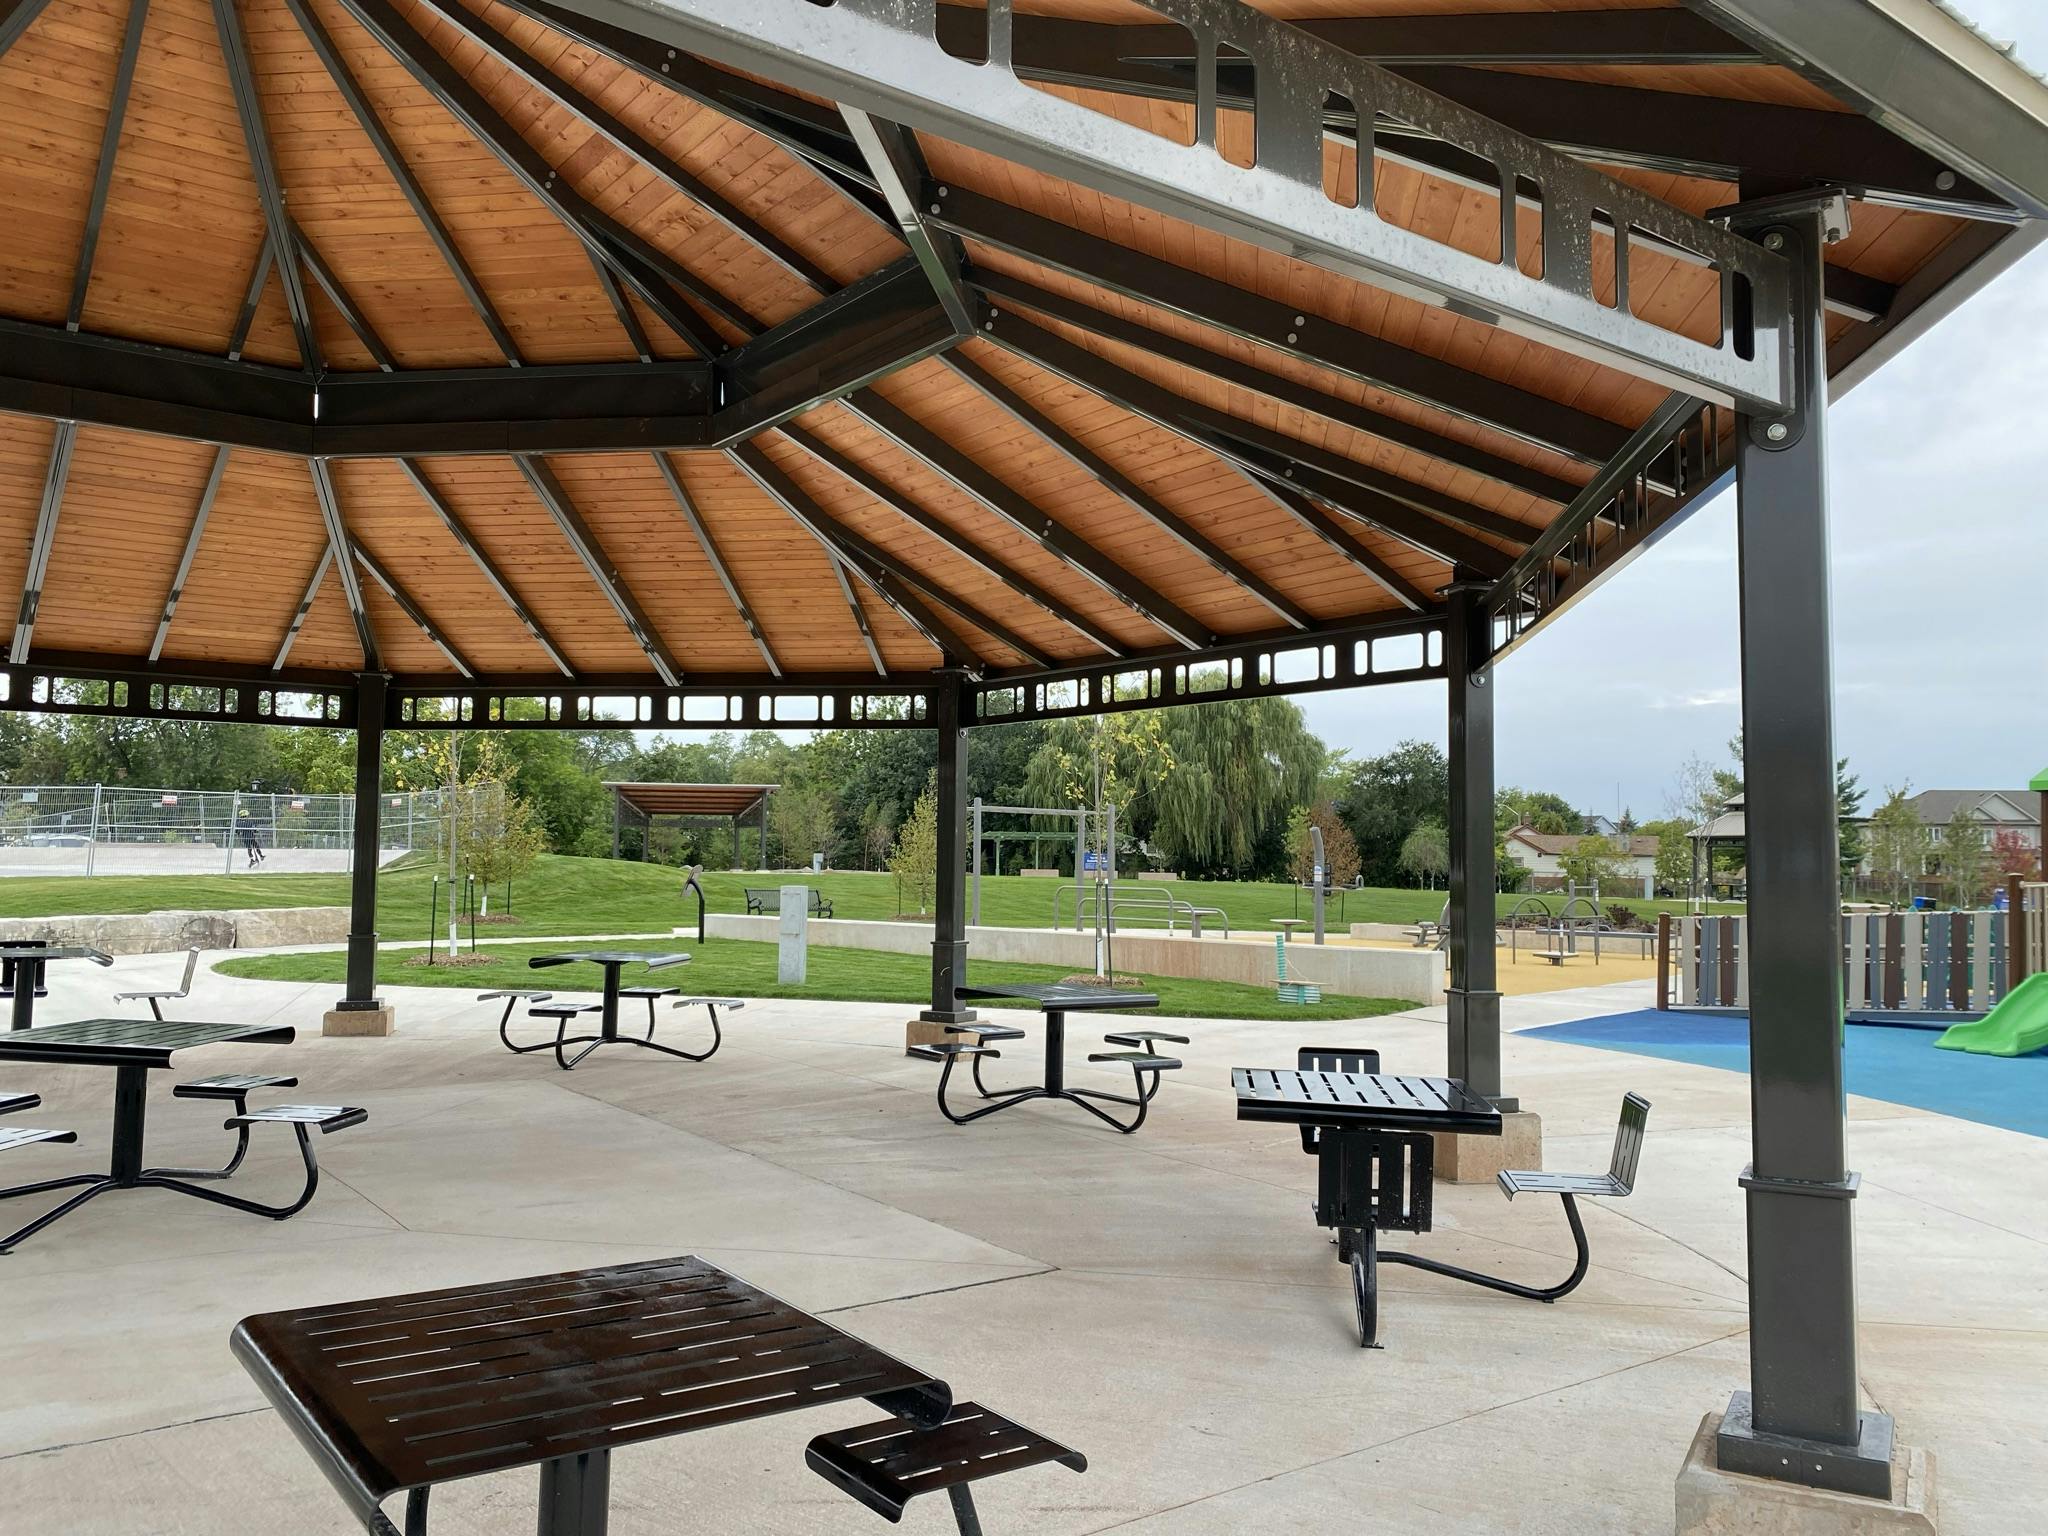 Main Shade Structure Seating Area